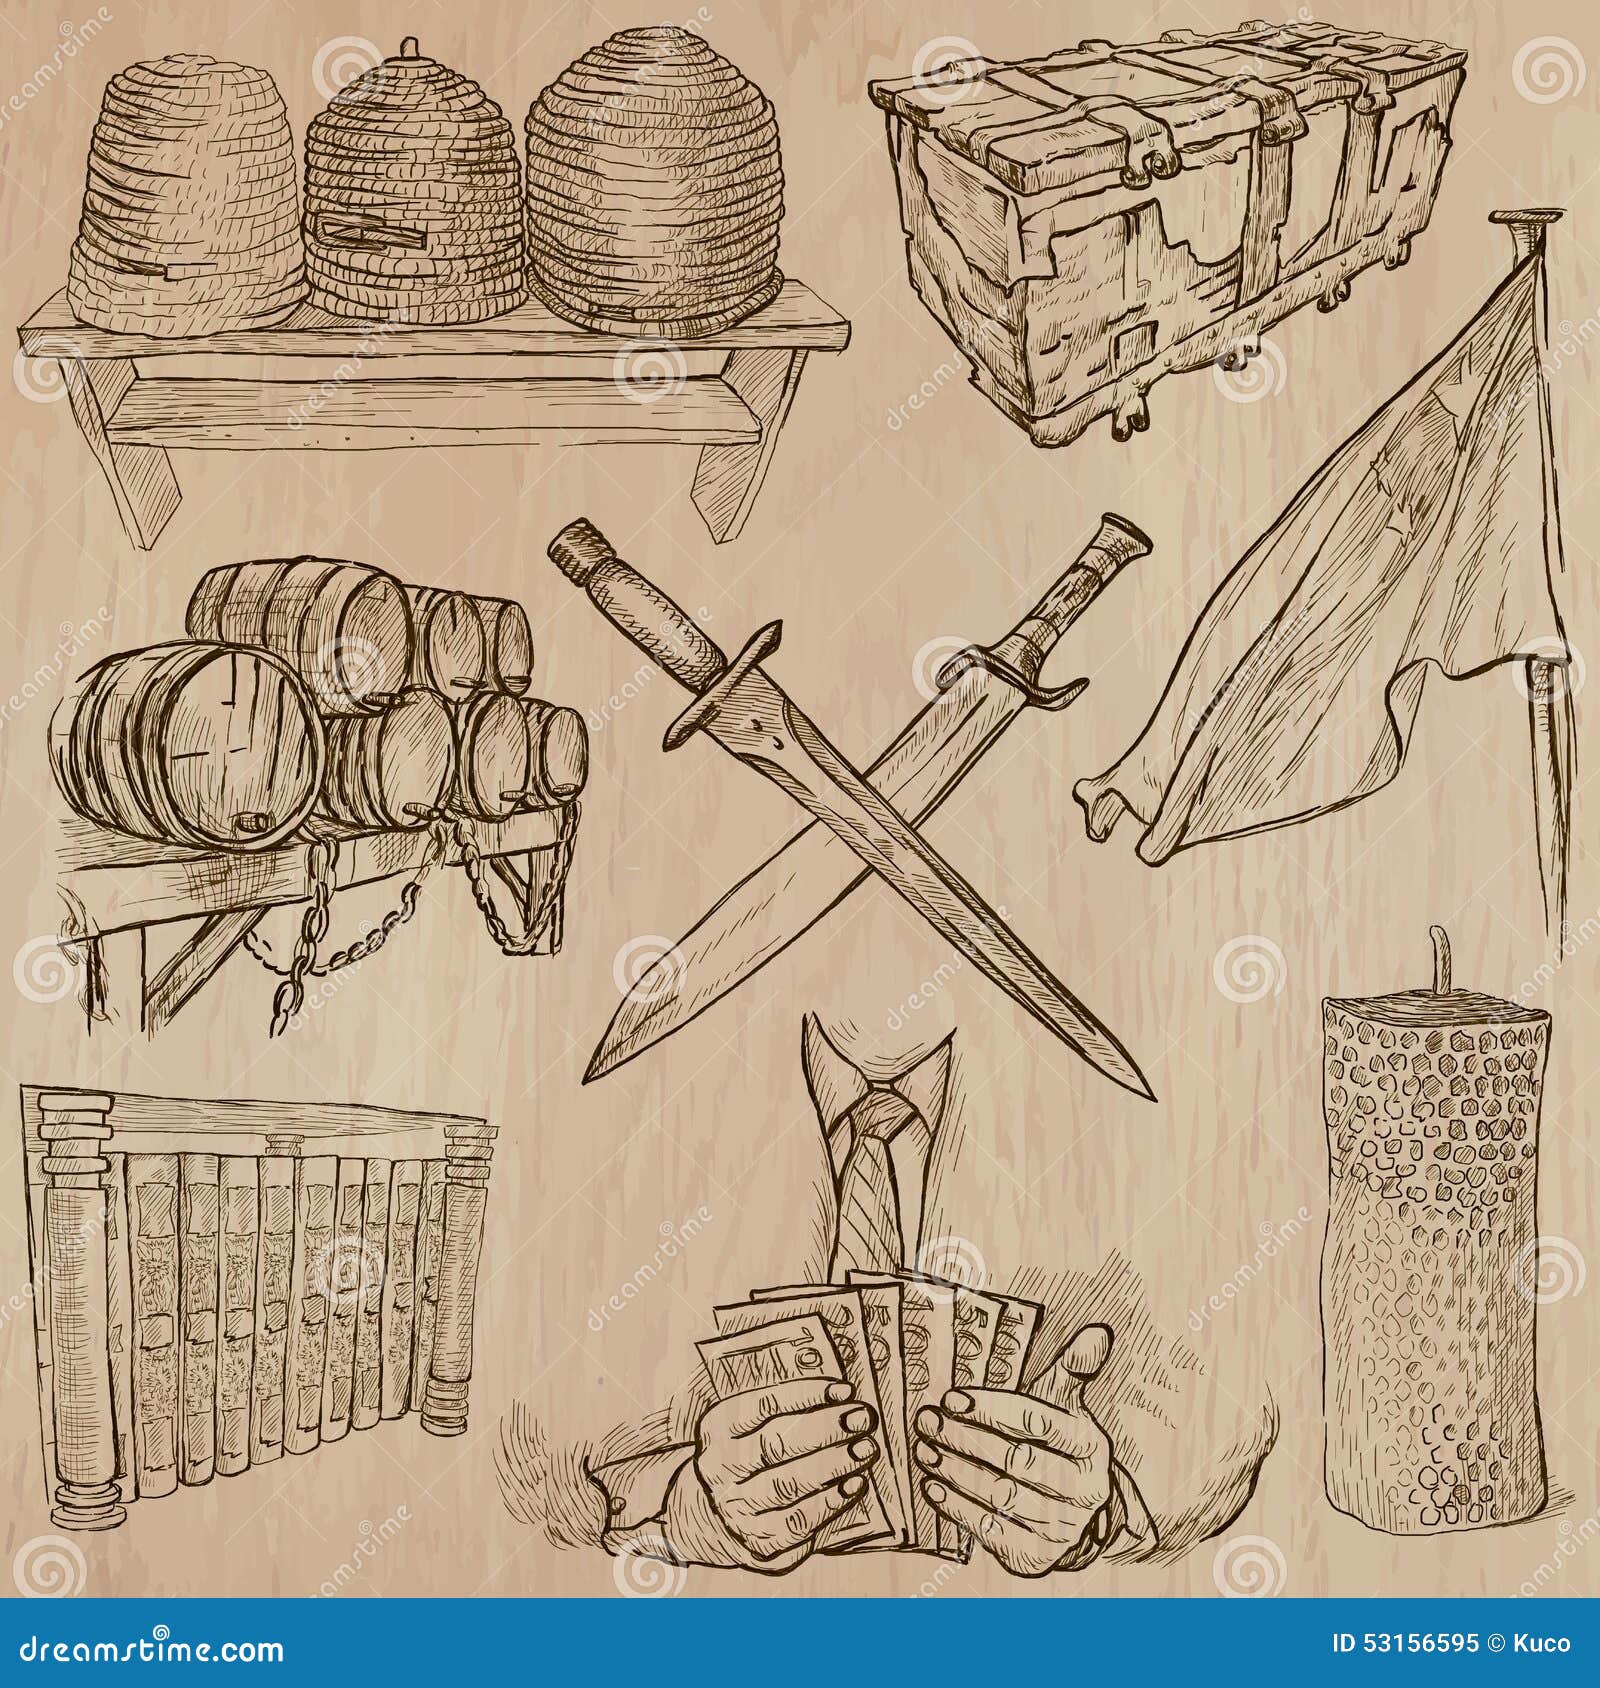 More daily item sketches by RhoviArt on DeviantArt